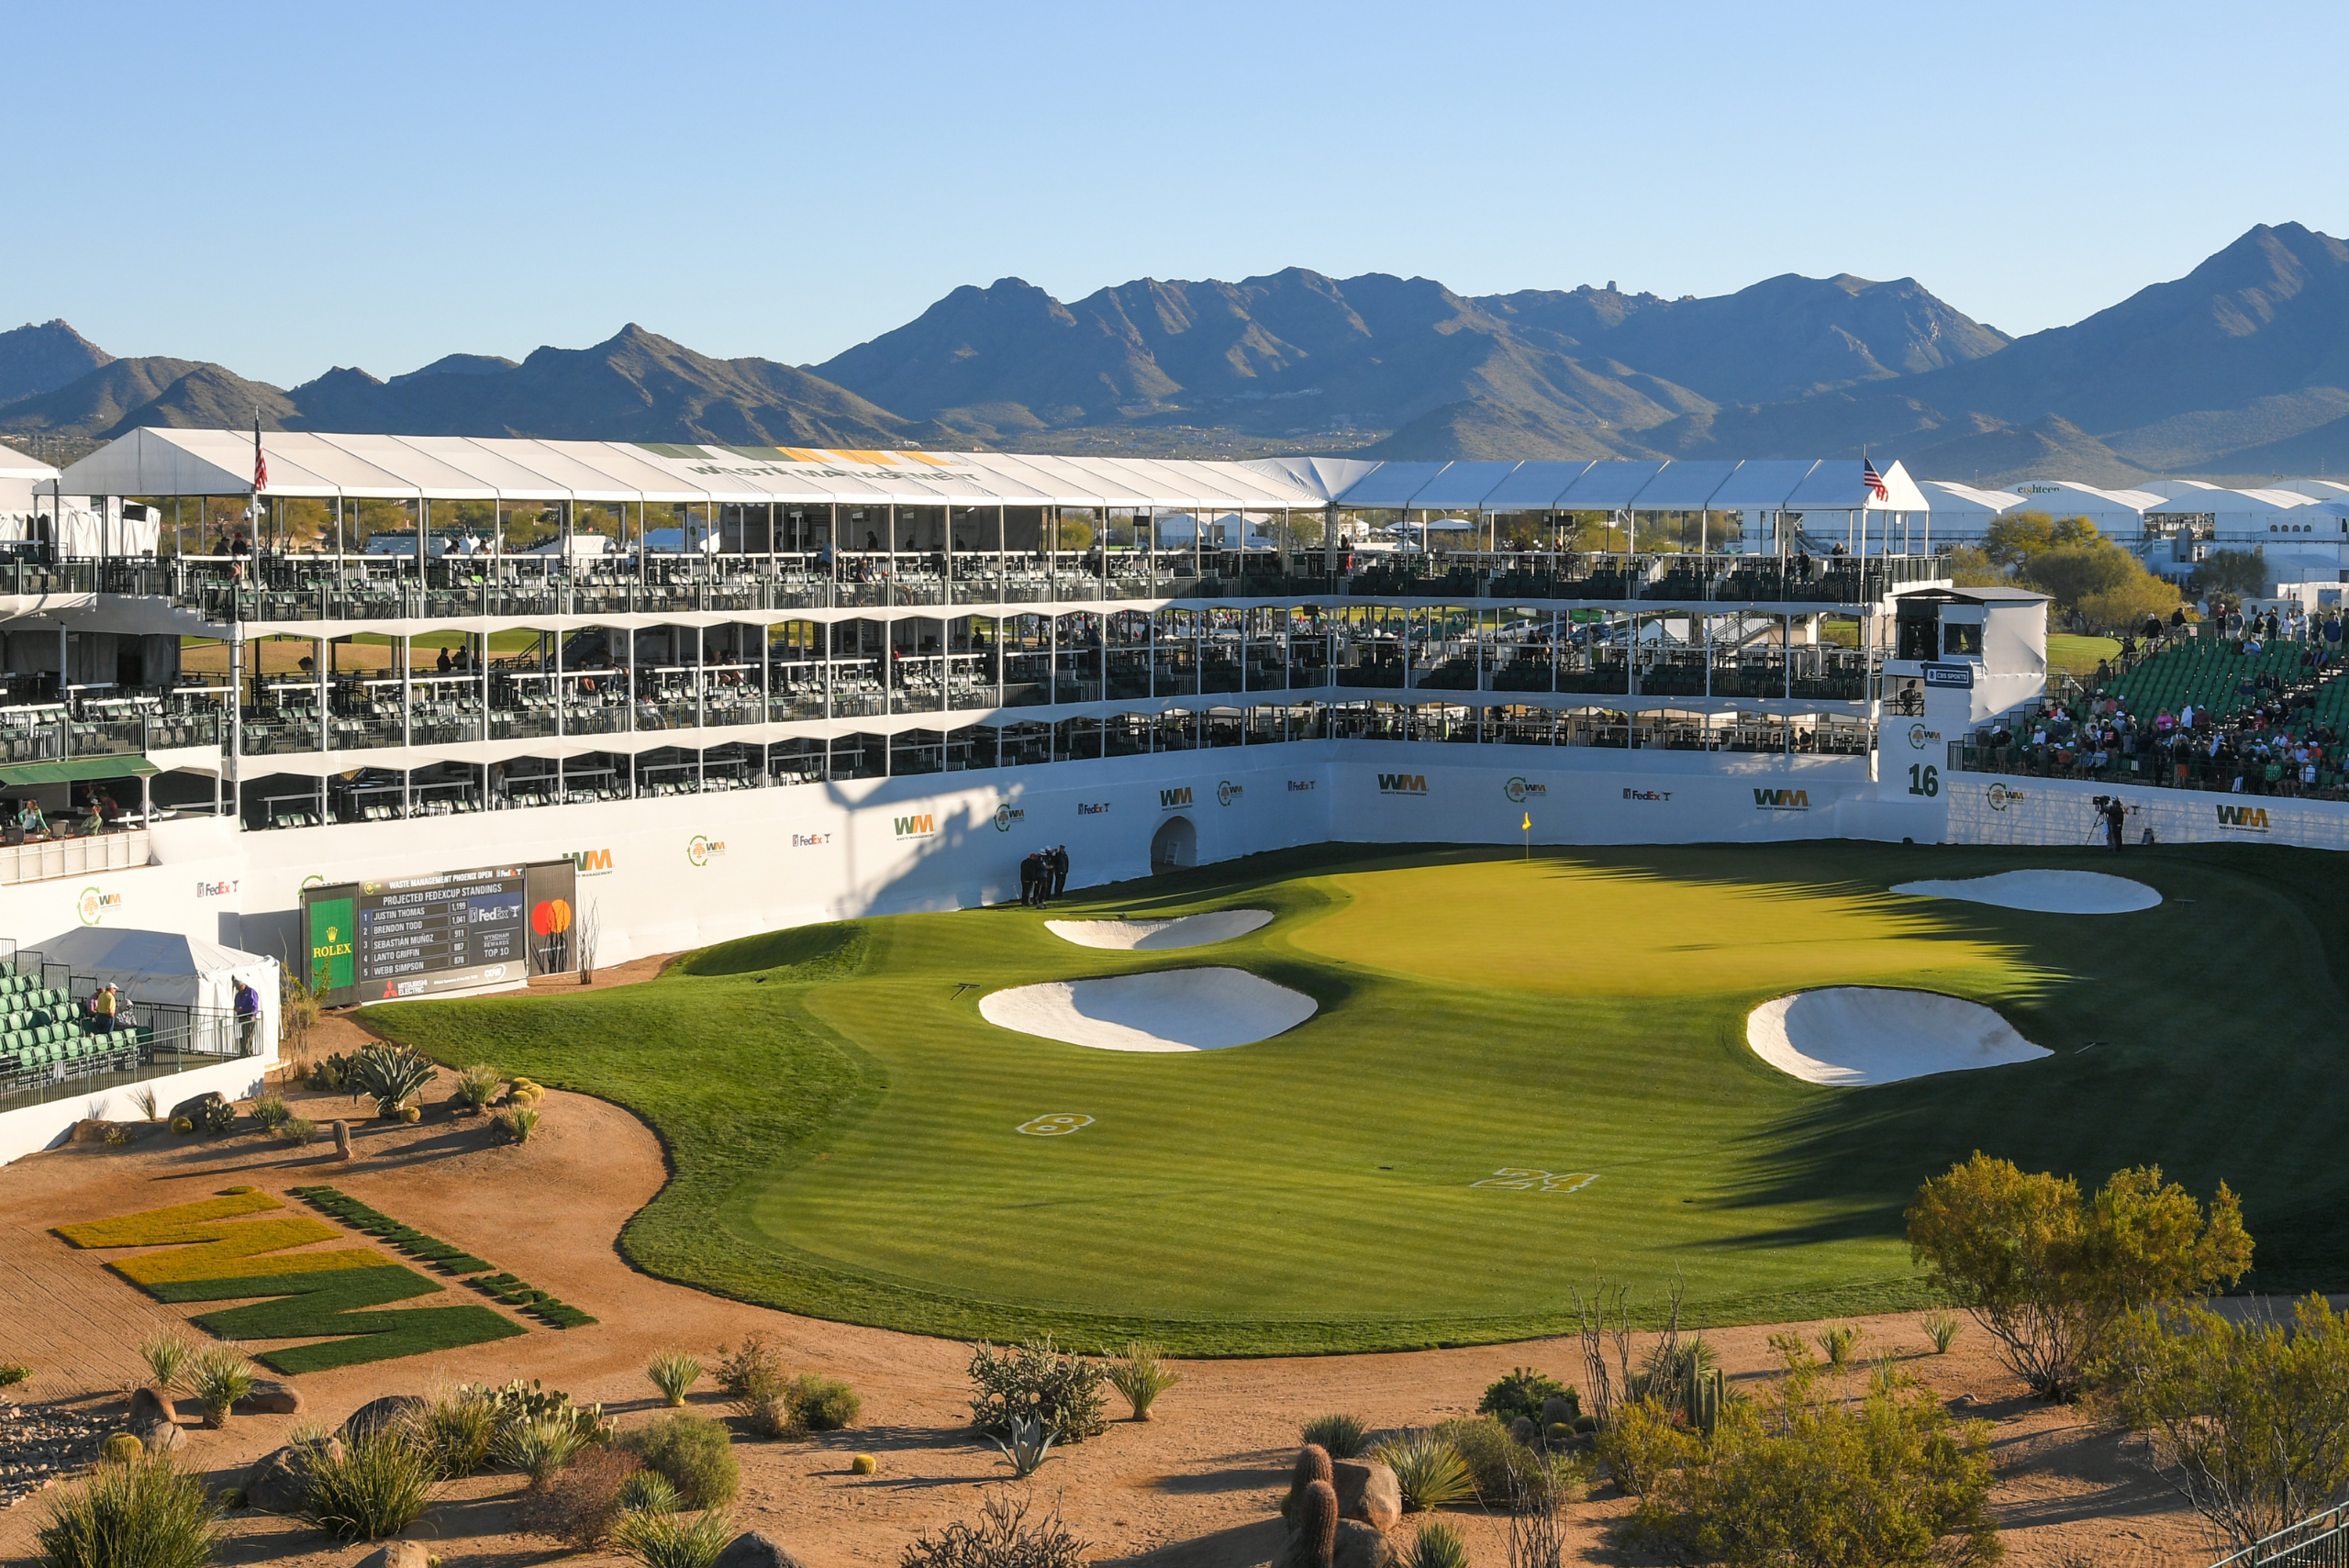 things to do during the waste management phoenix open